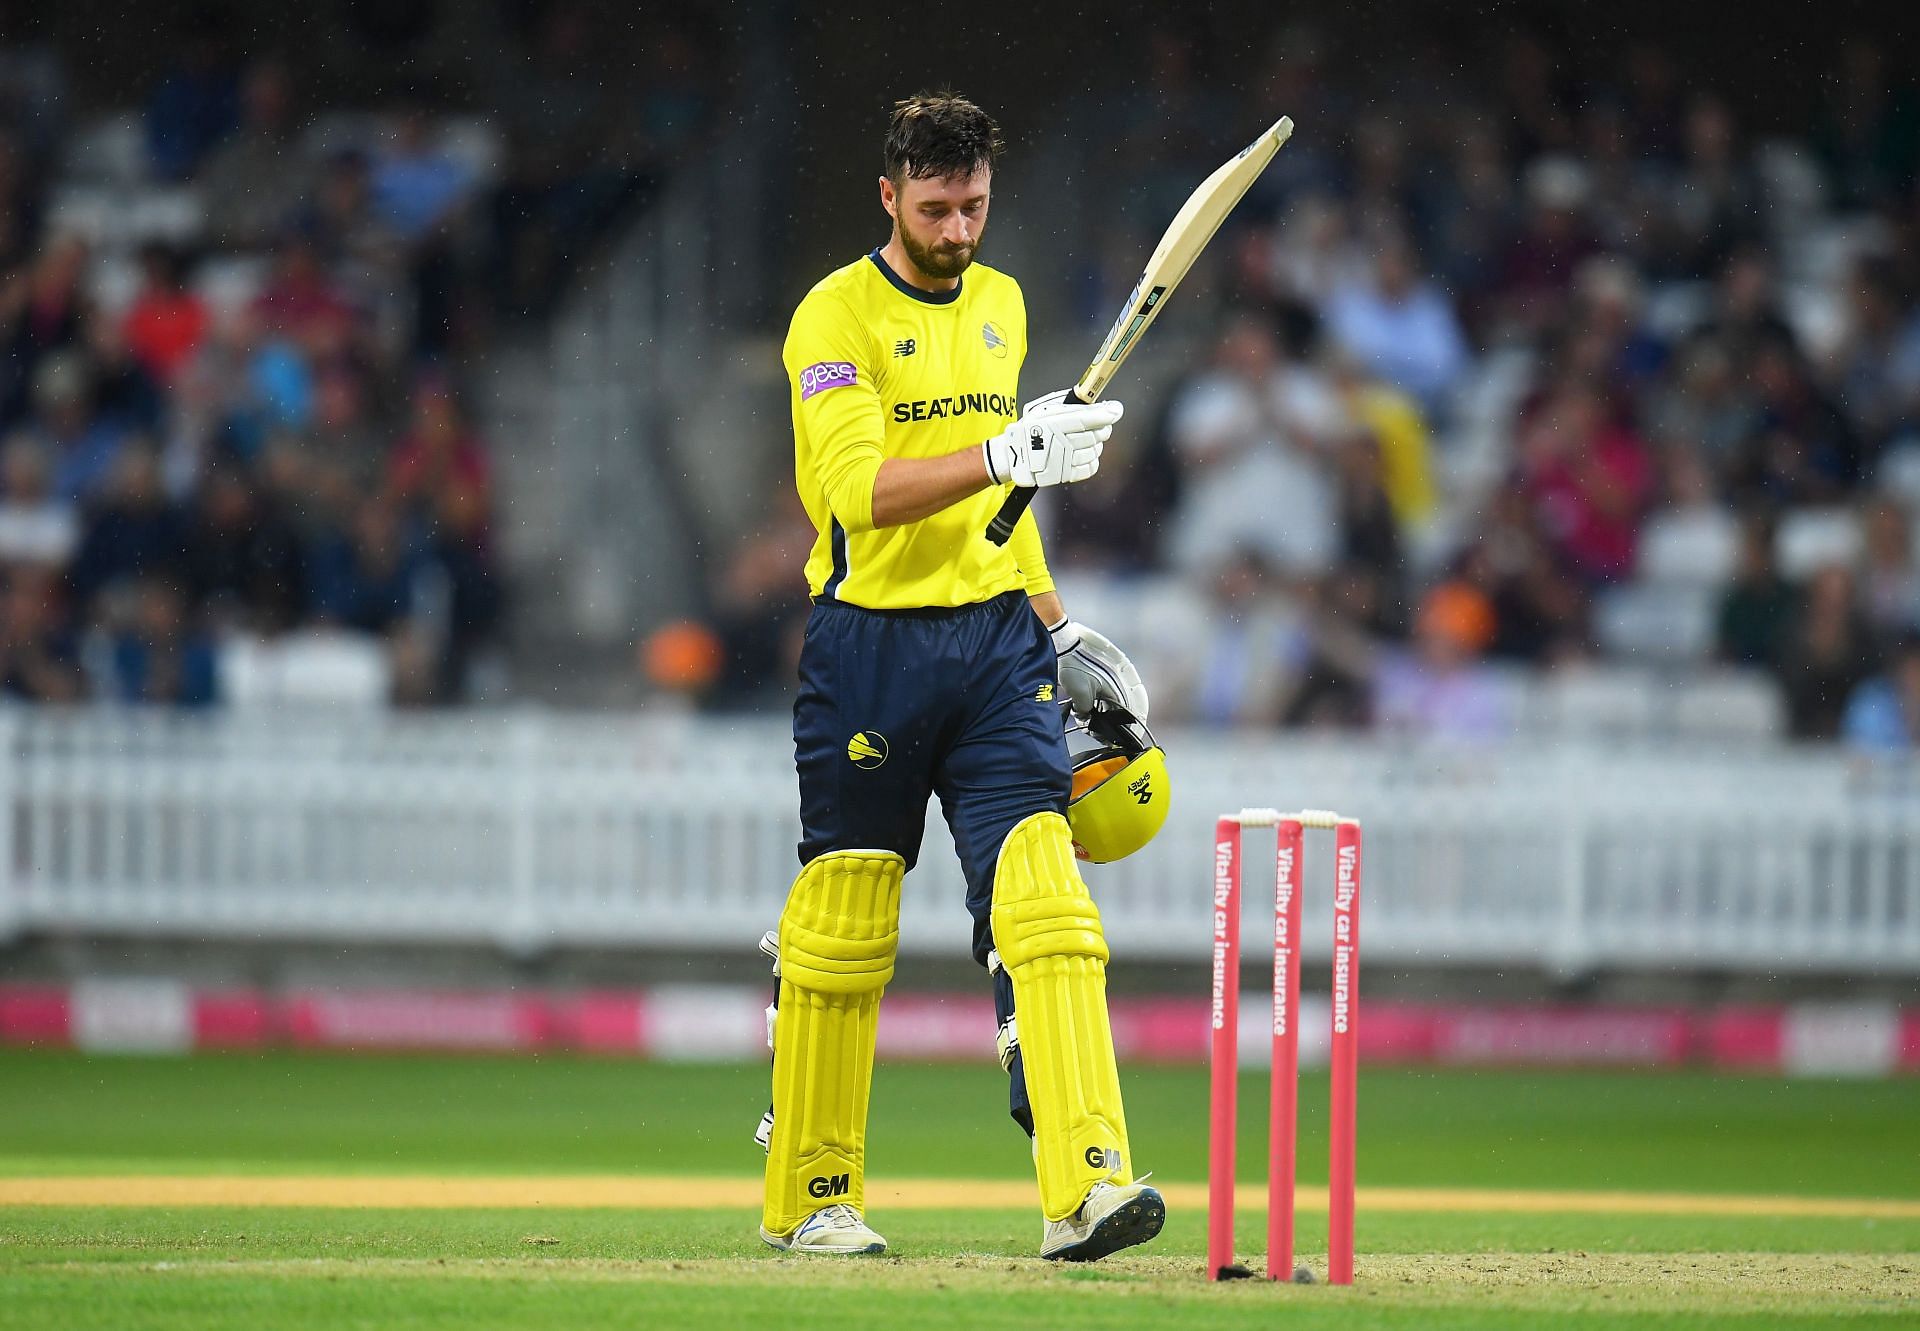 James Vince is currently playing for Hampshire in county cricket (Image courtesy: Getty Images)